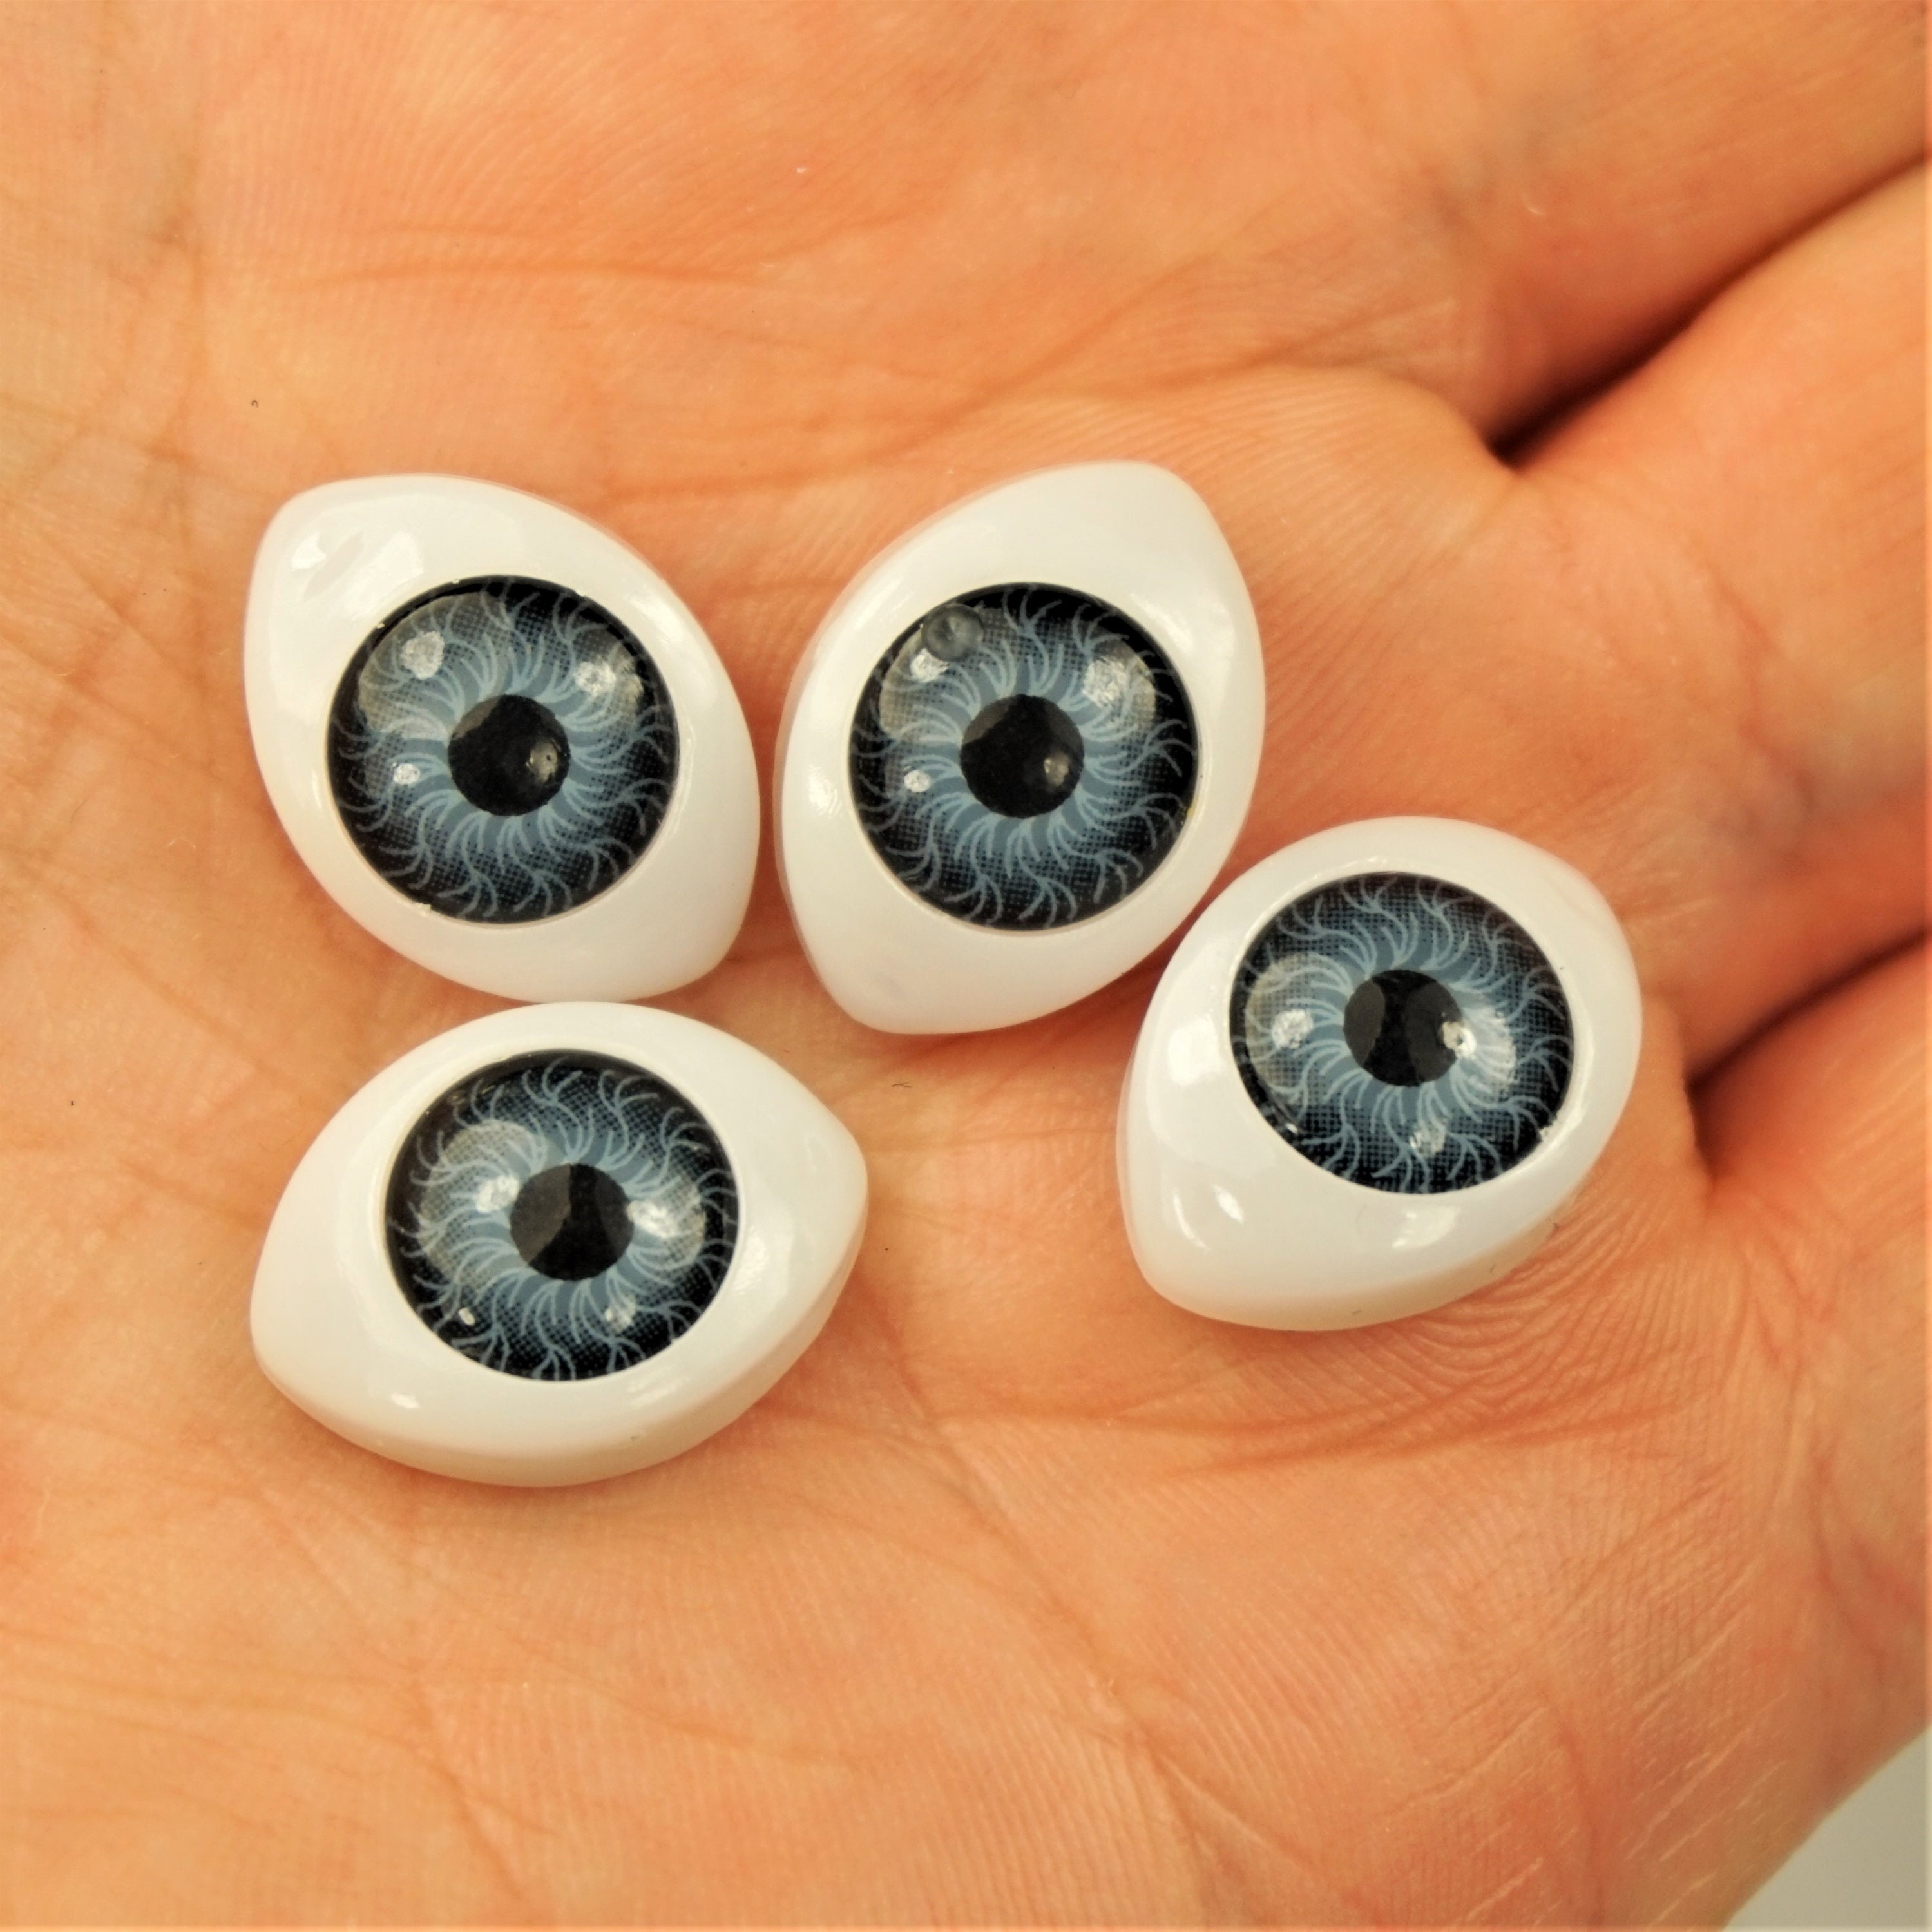 COHEALI 400 Pcs Eye Accessories Glass Eyes for Crafts Doll Making Supplies  Round Beads Halloween Decorations Eye Covered Cabochons Flat Back Doll Eyes